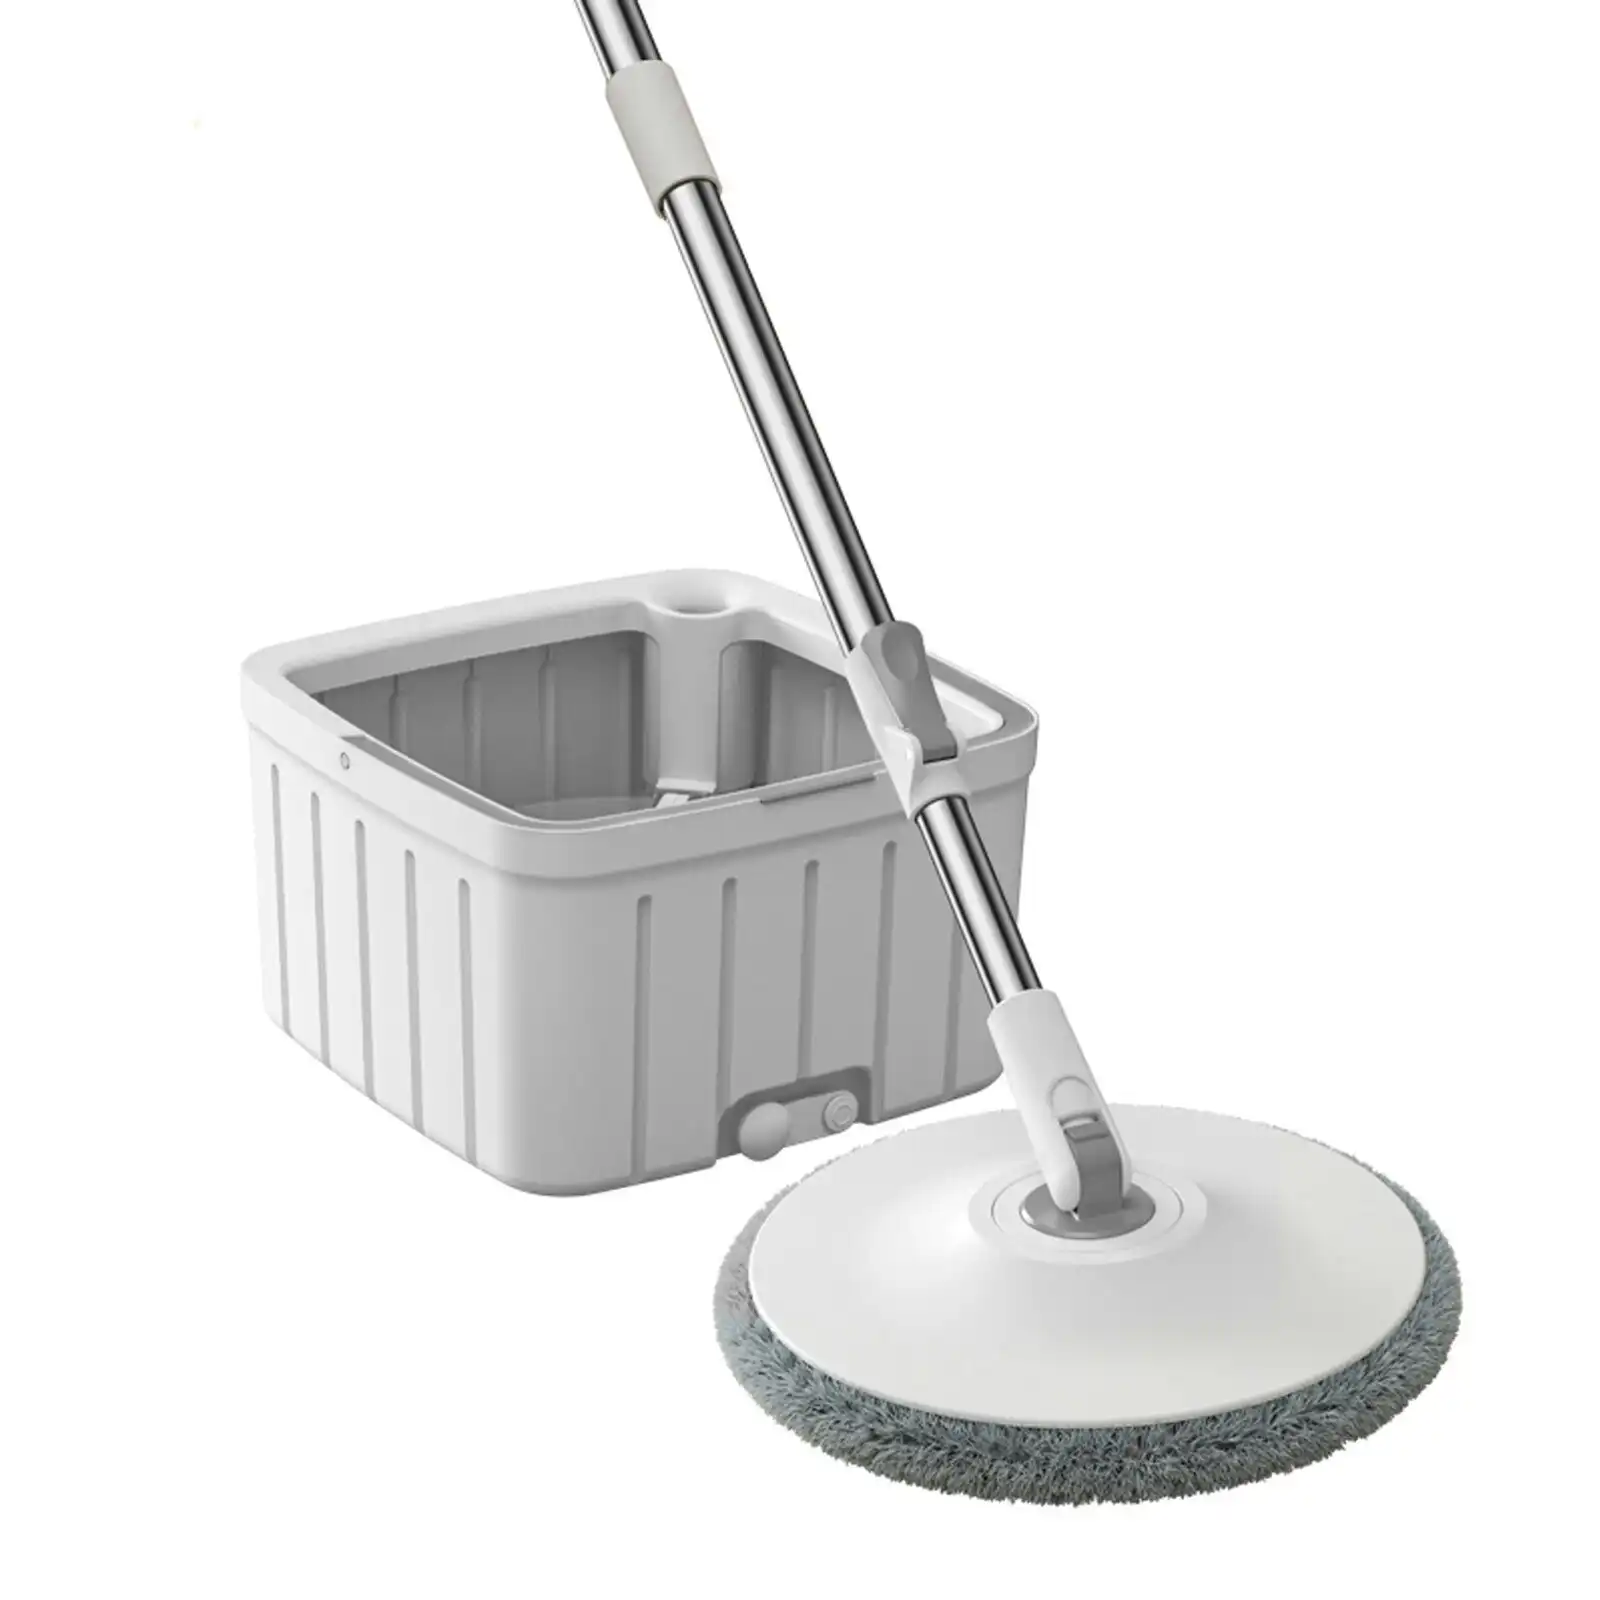 Self Wringing Spin Mop Bucket Set with Extendable Handle 360° Swivel and 2x Microfibre Mop Heads - Upgraded